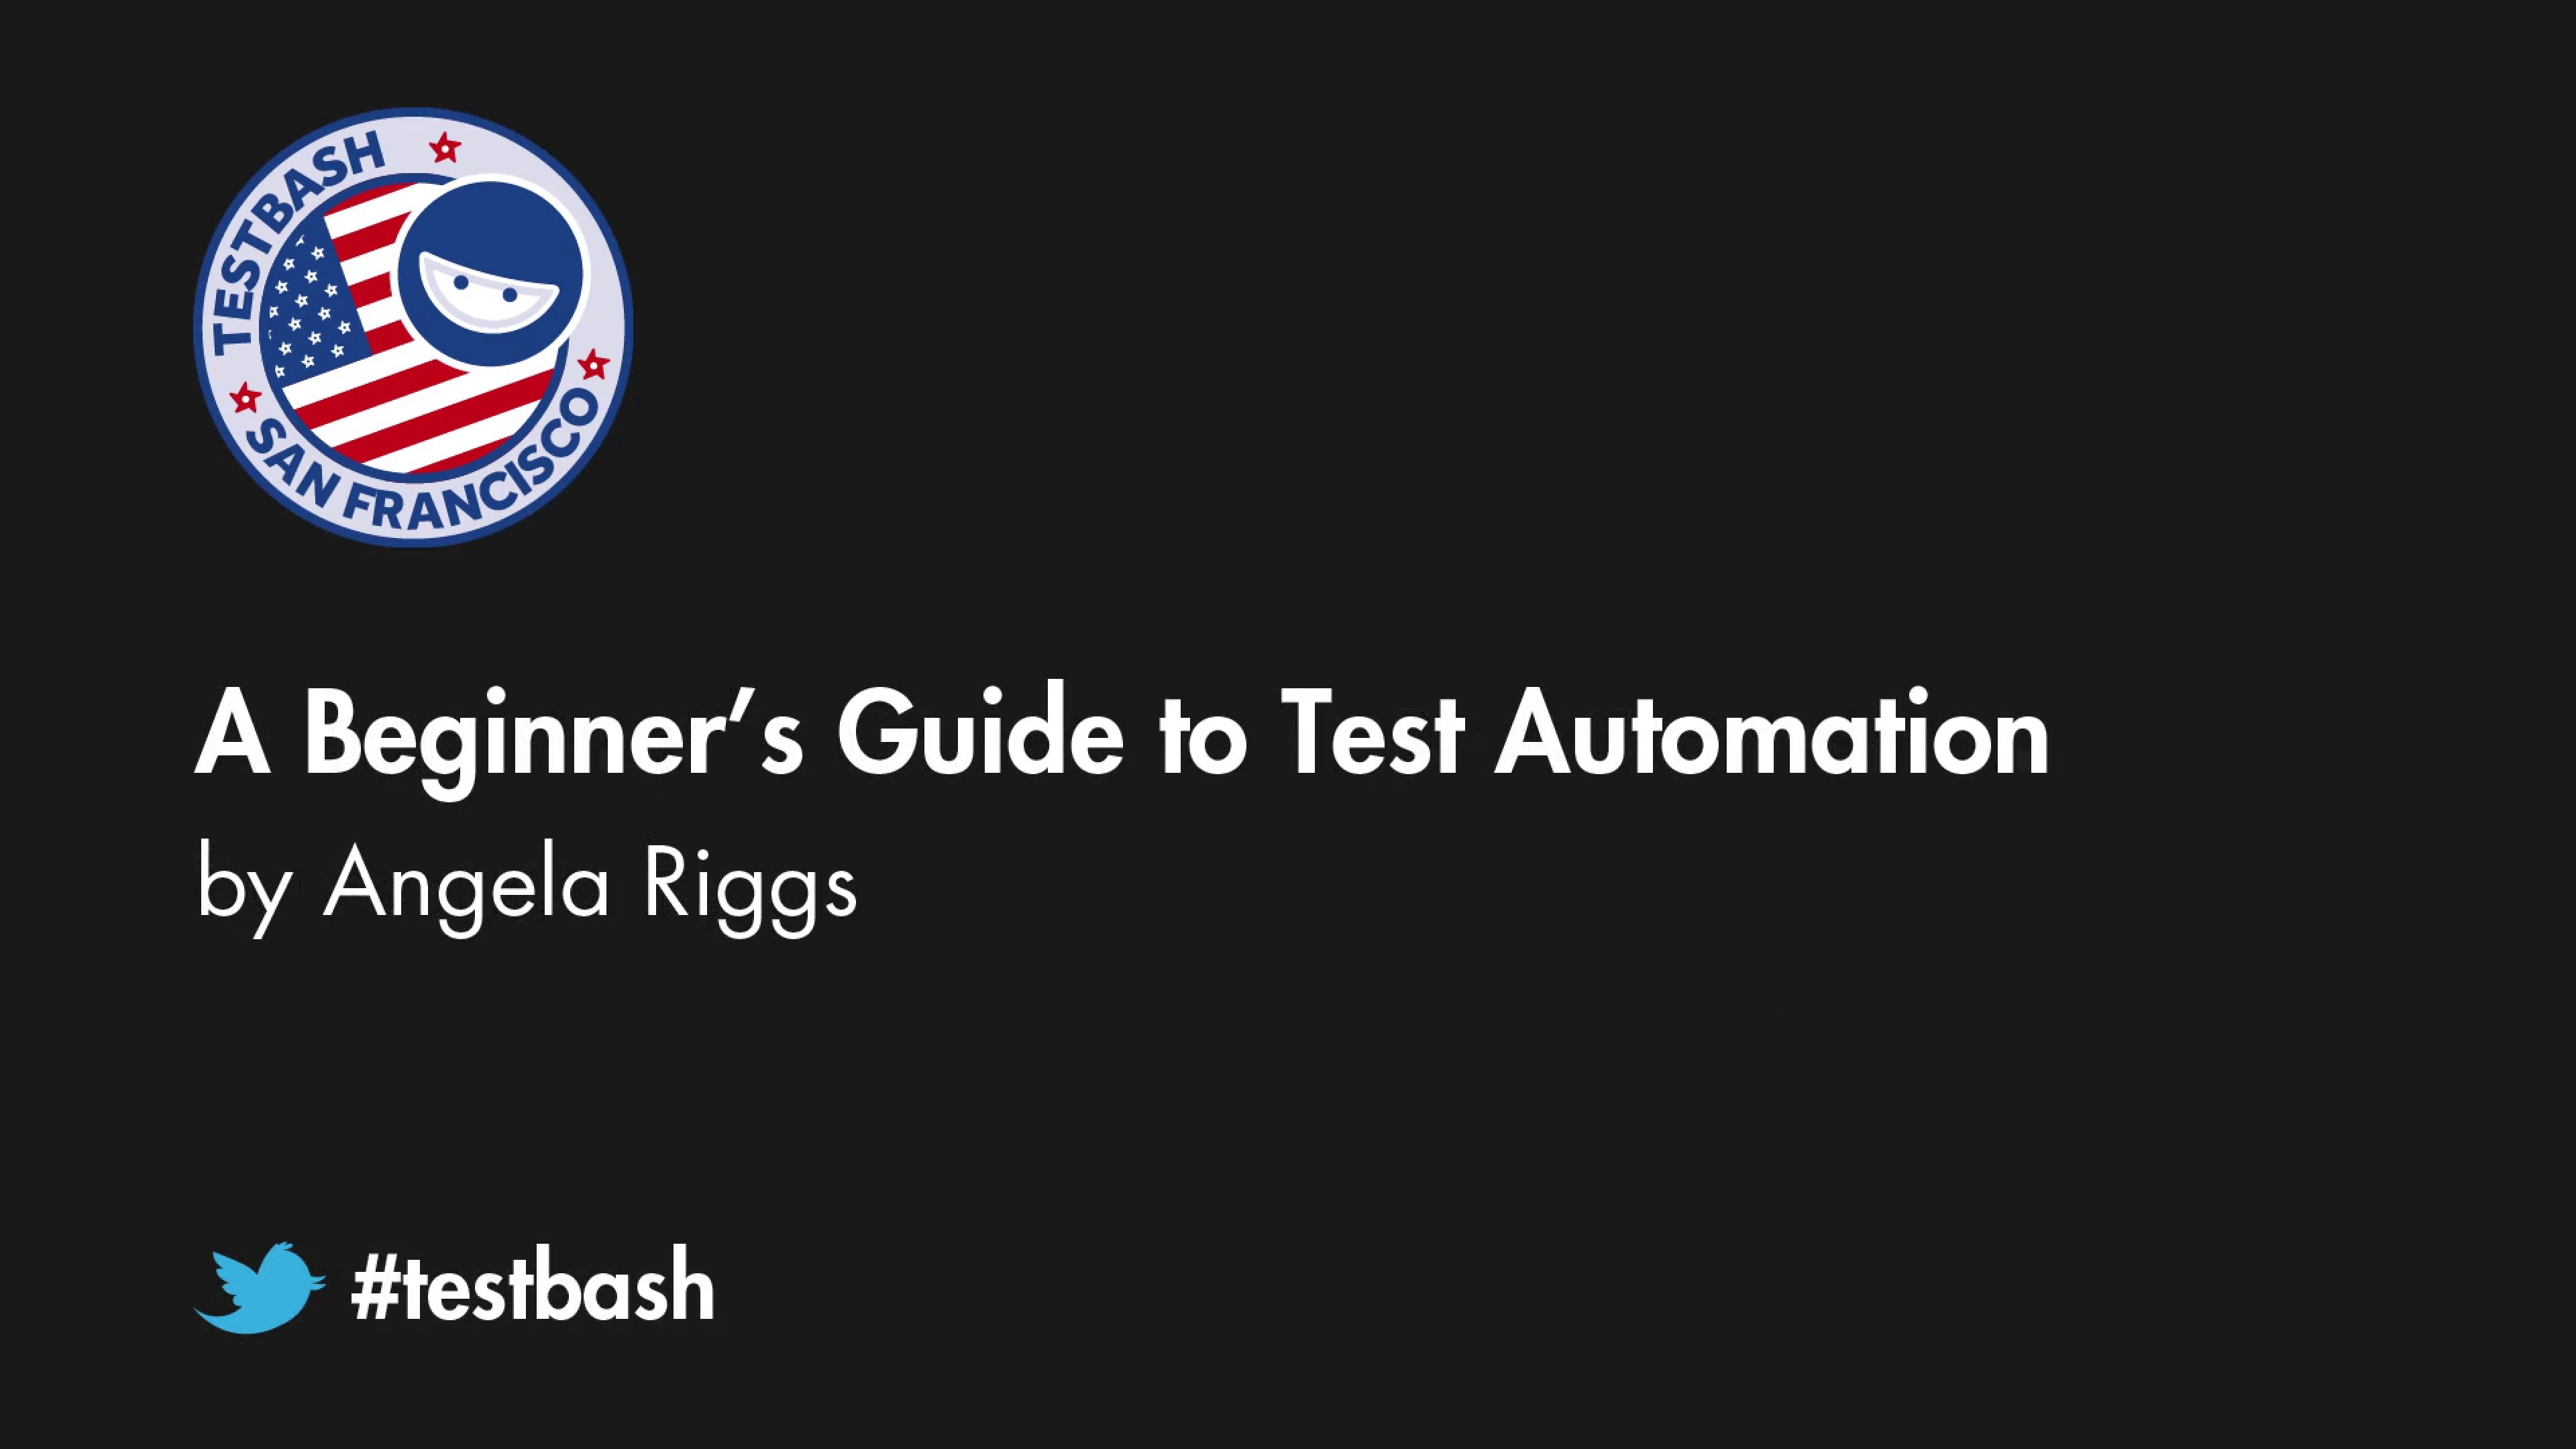 A Beginner’s Guide to Test Automation - Angela Riggs